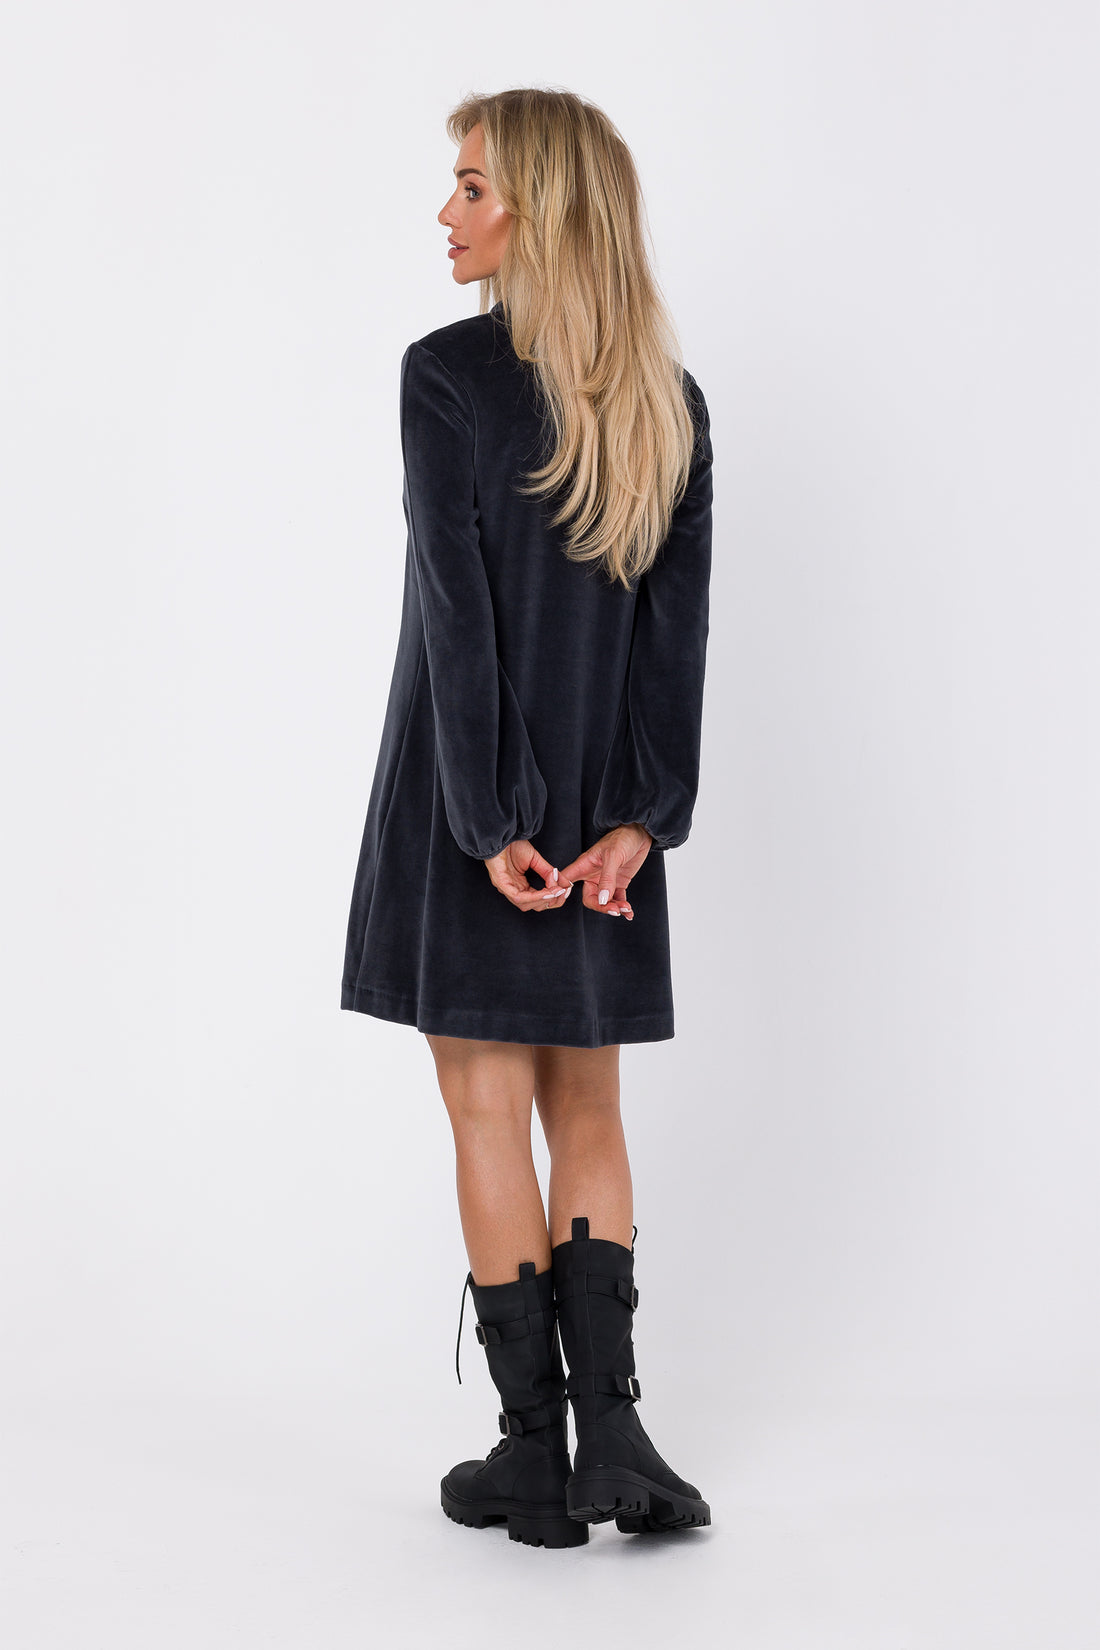 Velvet Mini Dress V-neck | Strictly In | Perfect for casual outings or evening events, pair it with ankle boots for a laid-back vibe or strappy heels for a more polished look.